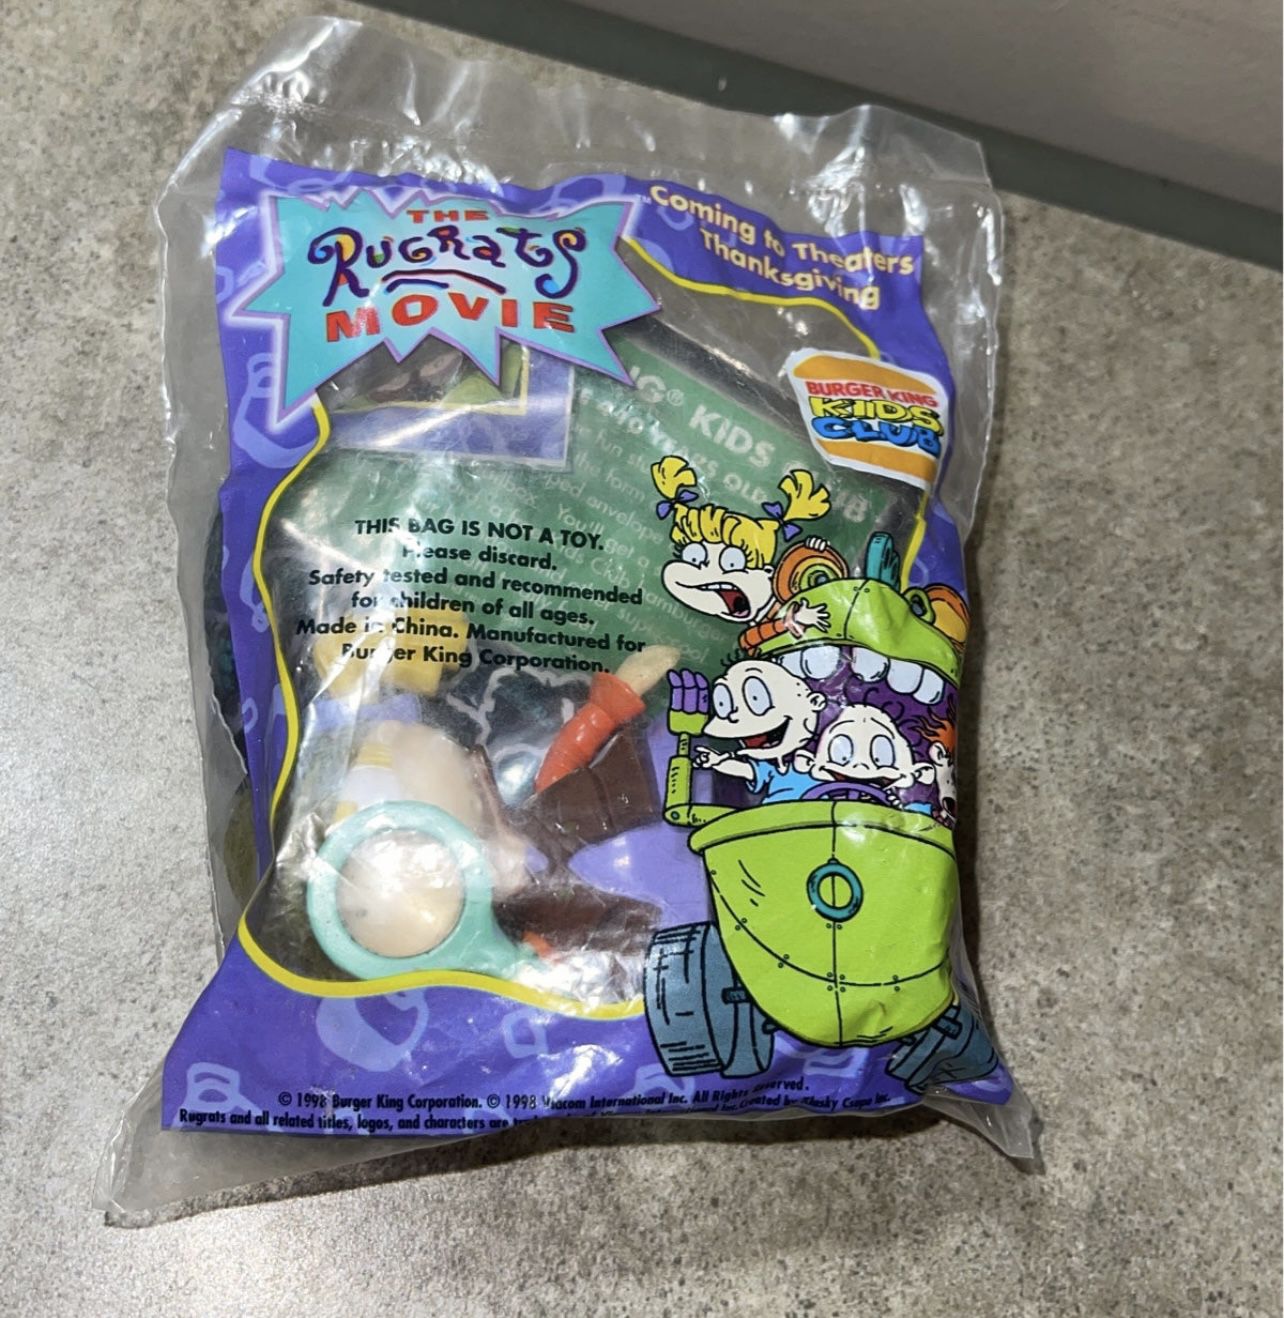 1998 Burger King Kids Meal Toy Nickelodeon Rugrats Movie Angelica the Detective